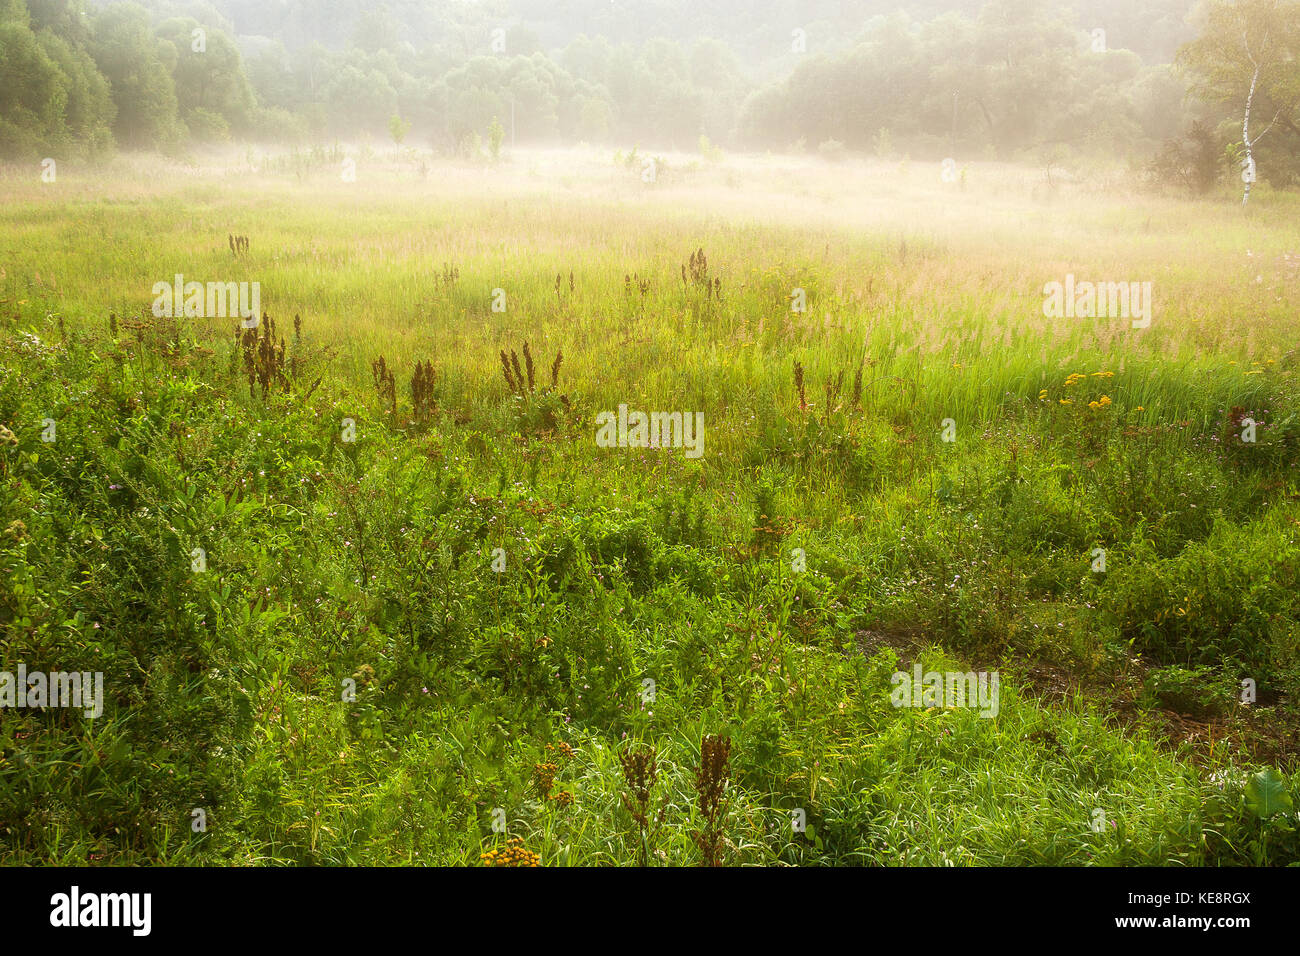 Summer morning landscape with meadow covered by plants in fog and mist. Stock Photo